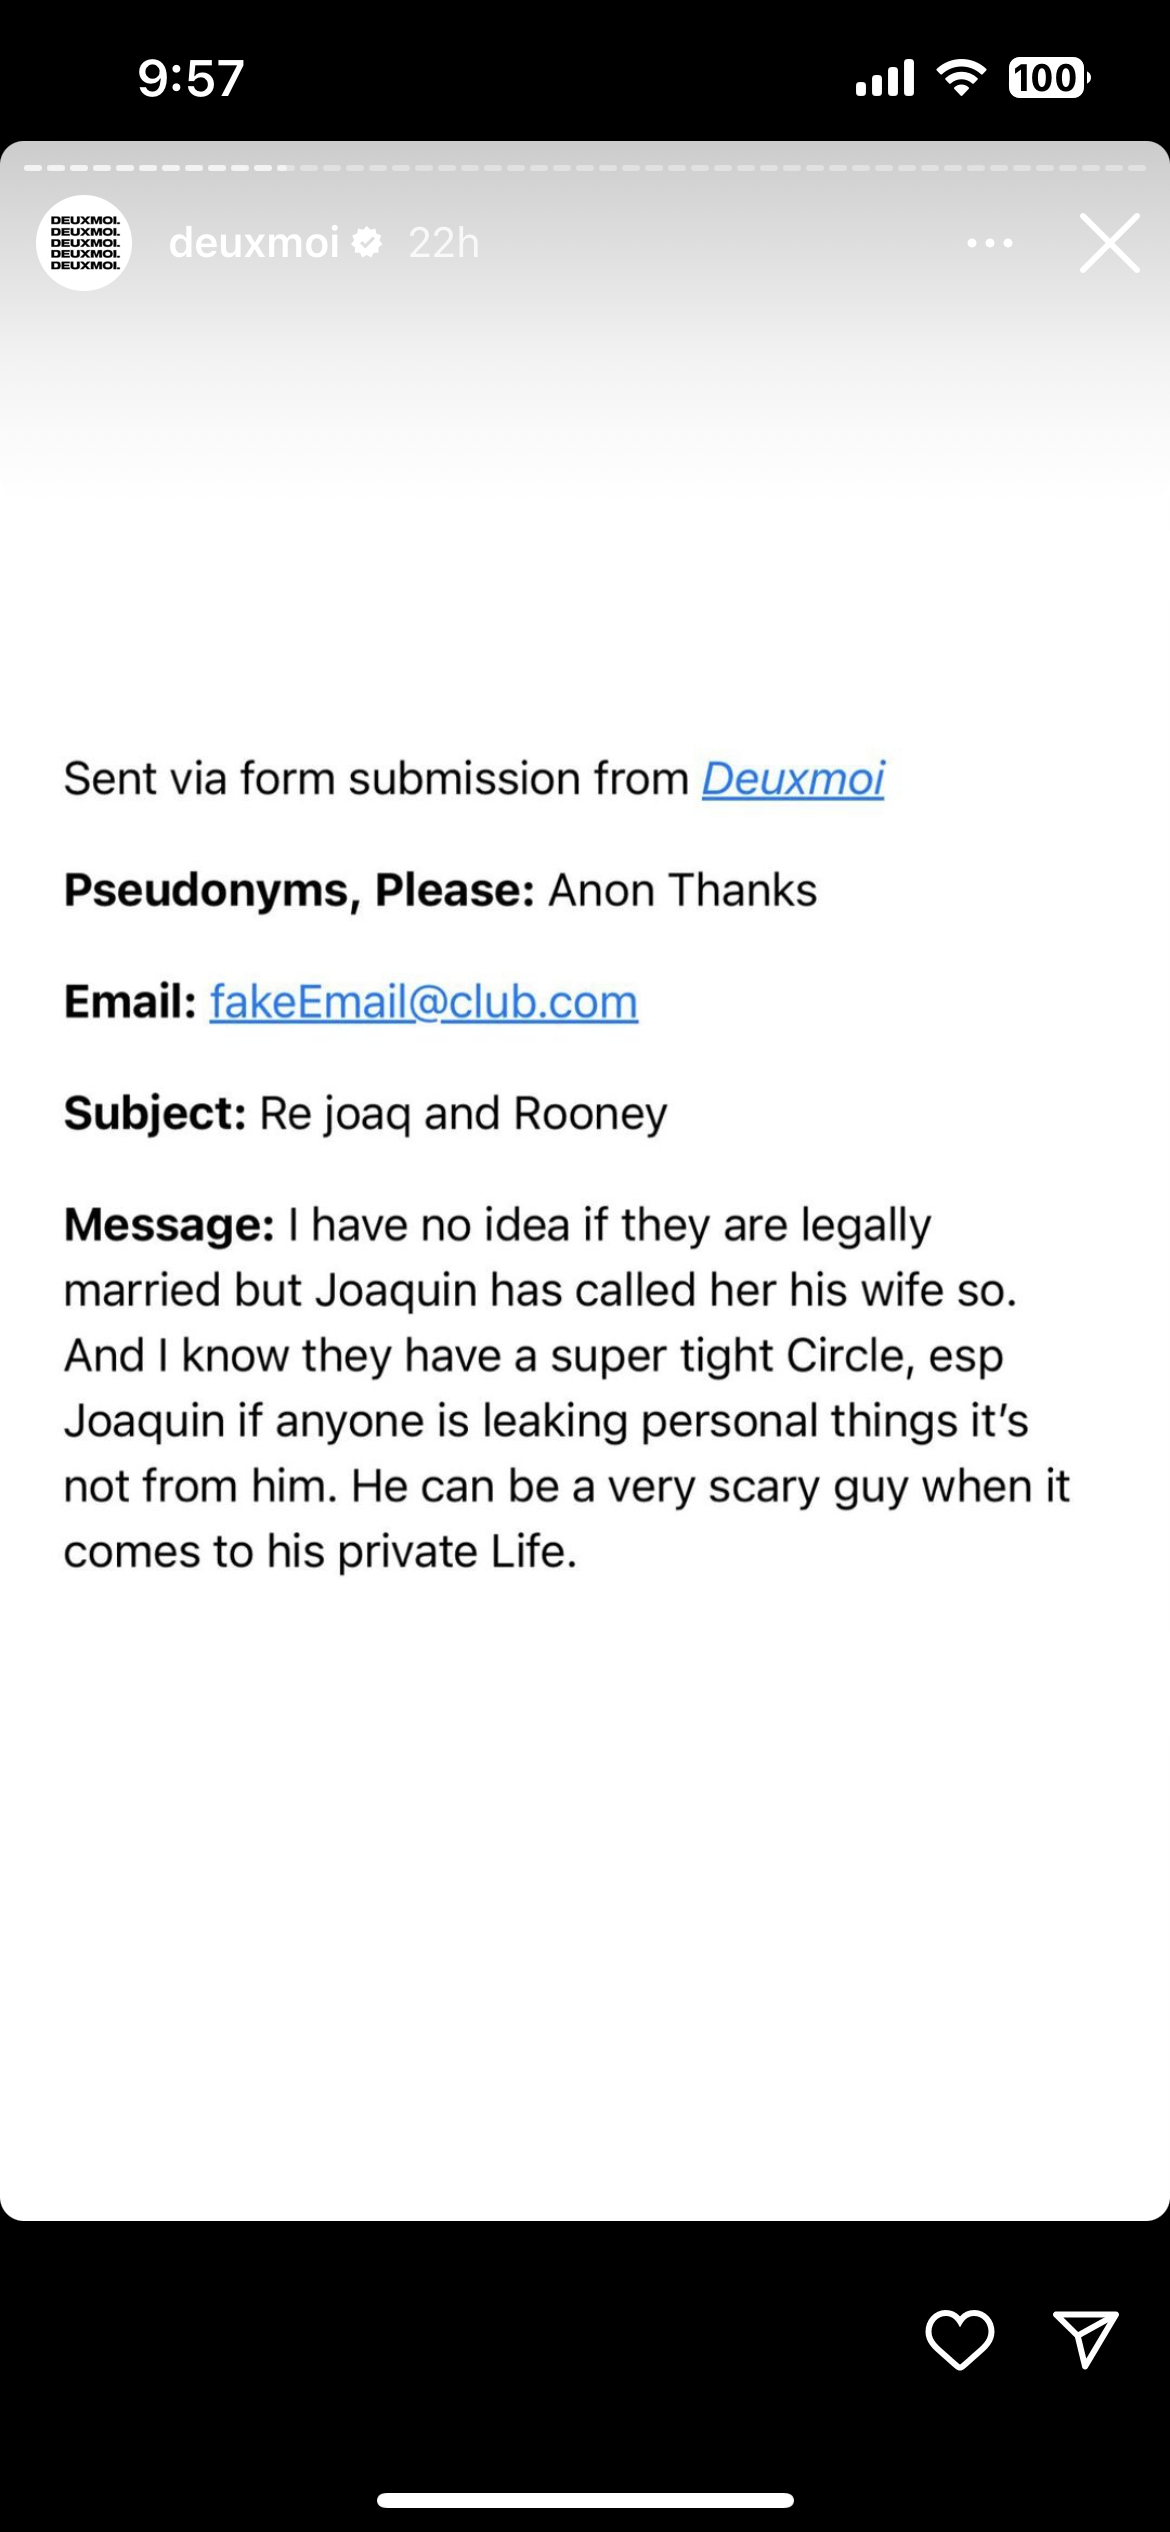 An insider's thought on Joaquin Phoenix and Rooney Mara’s reported wedding. 